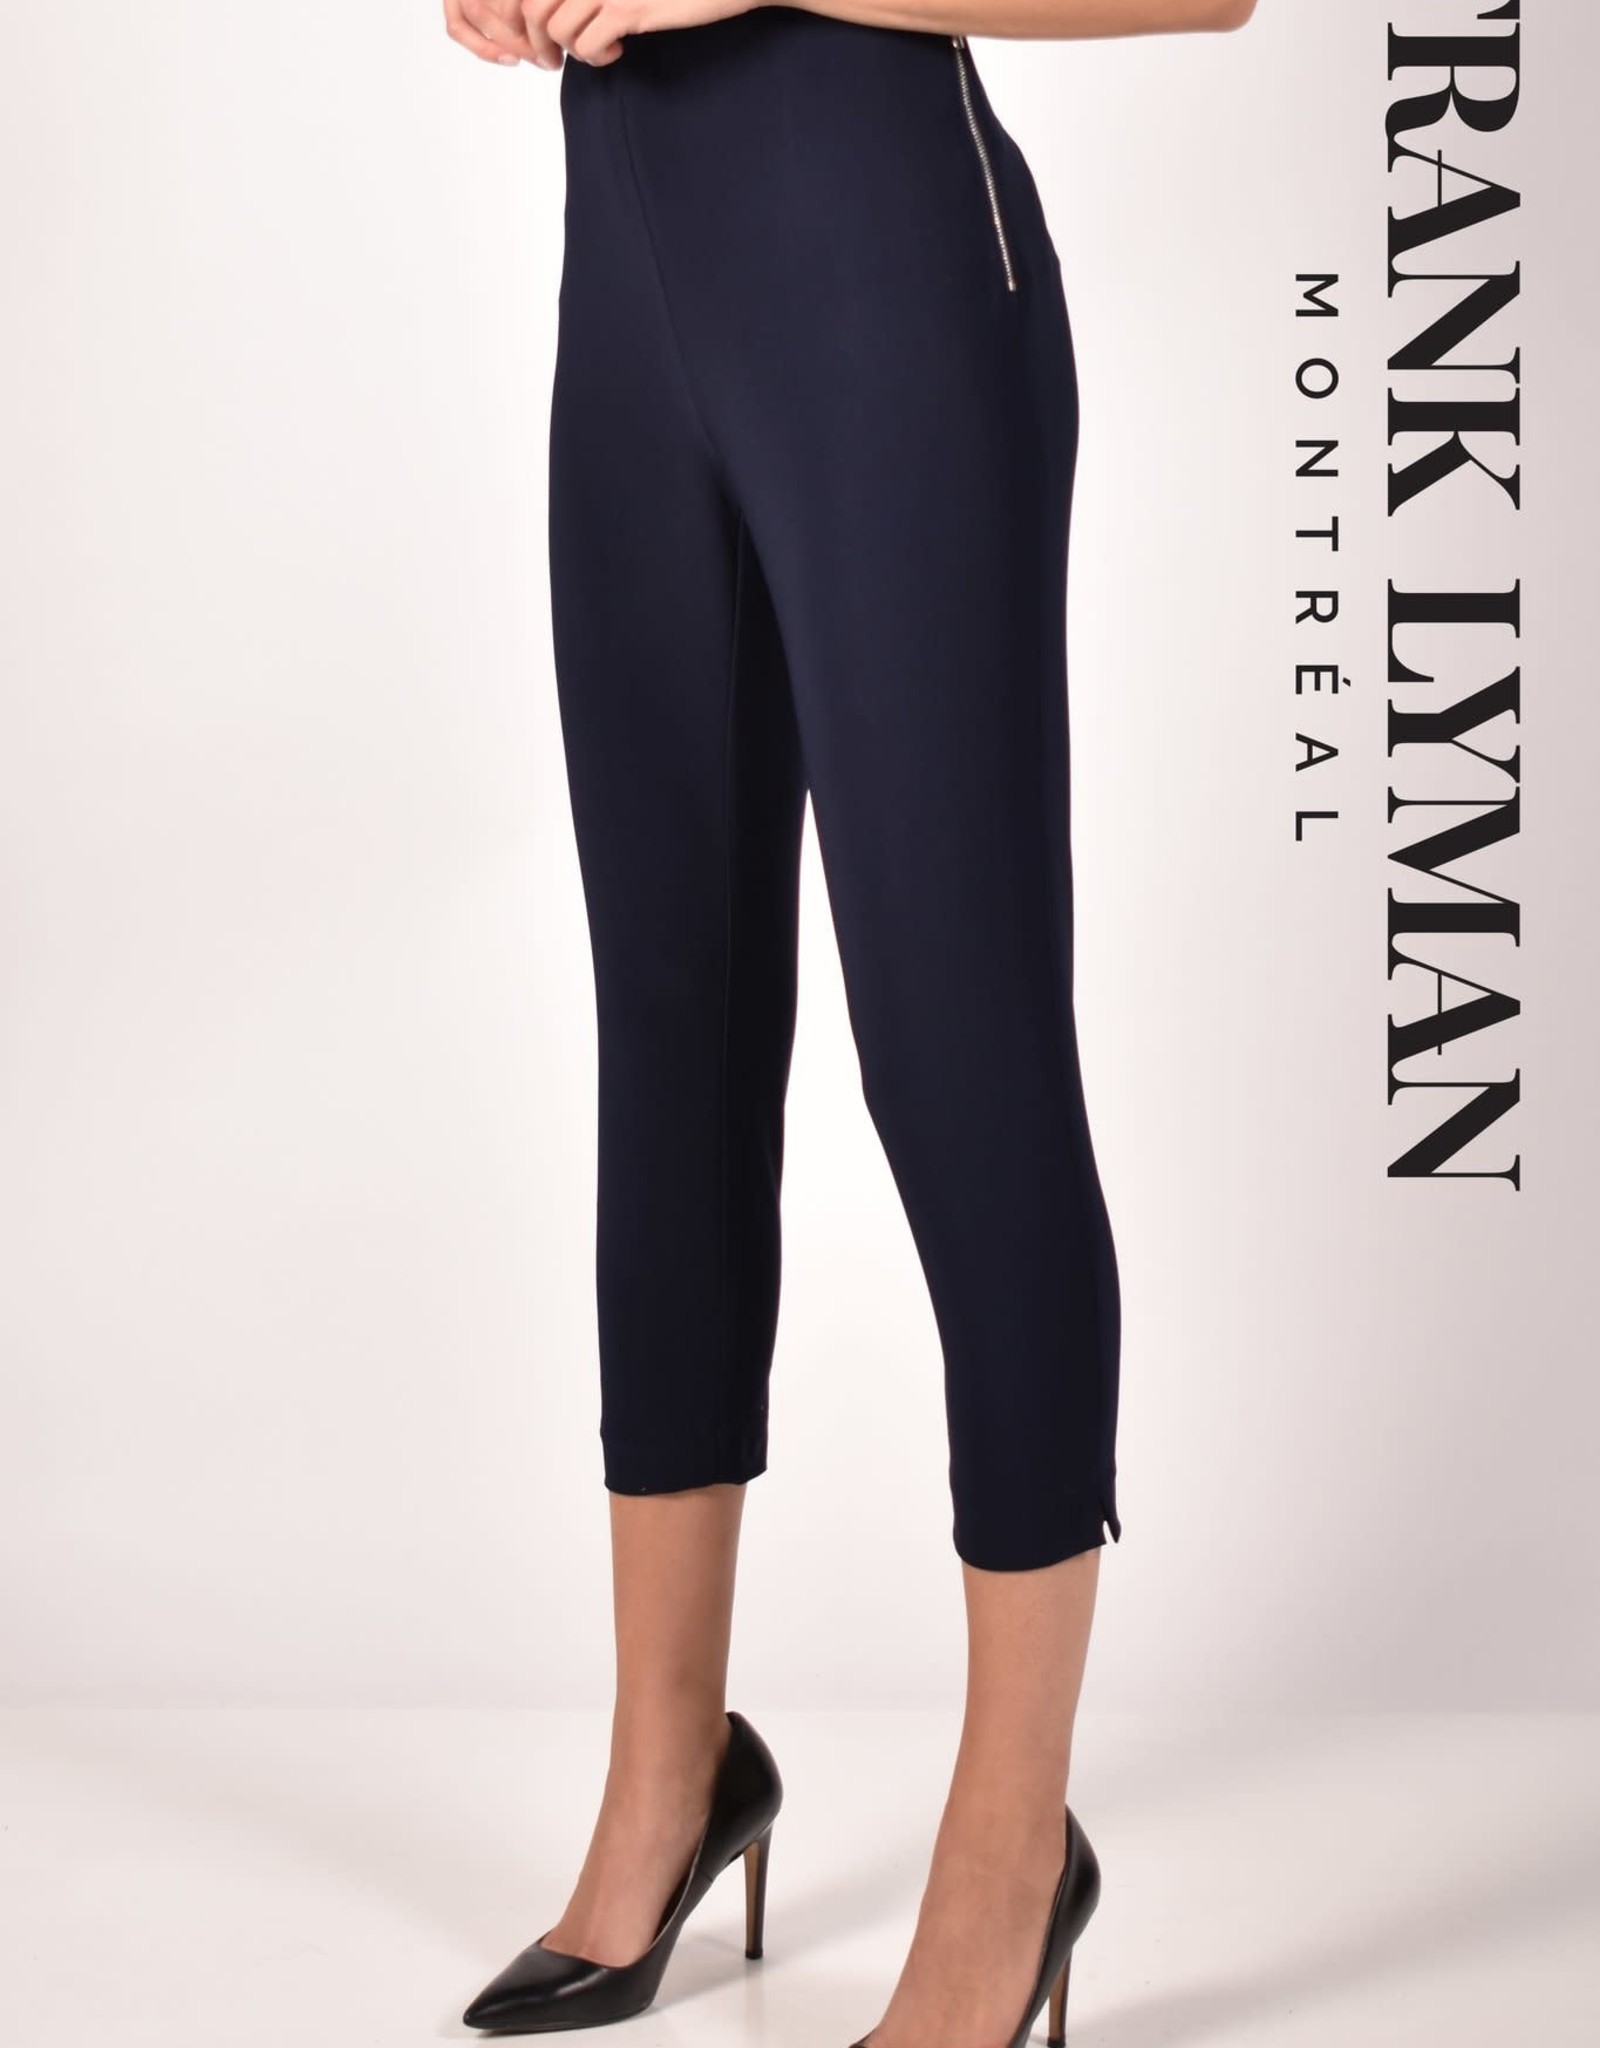 Frank Lyman Frank Lyman 211022 Knit Capri Pant with Zipper at the Left side of the Waistband